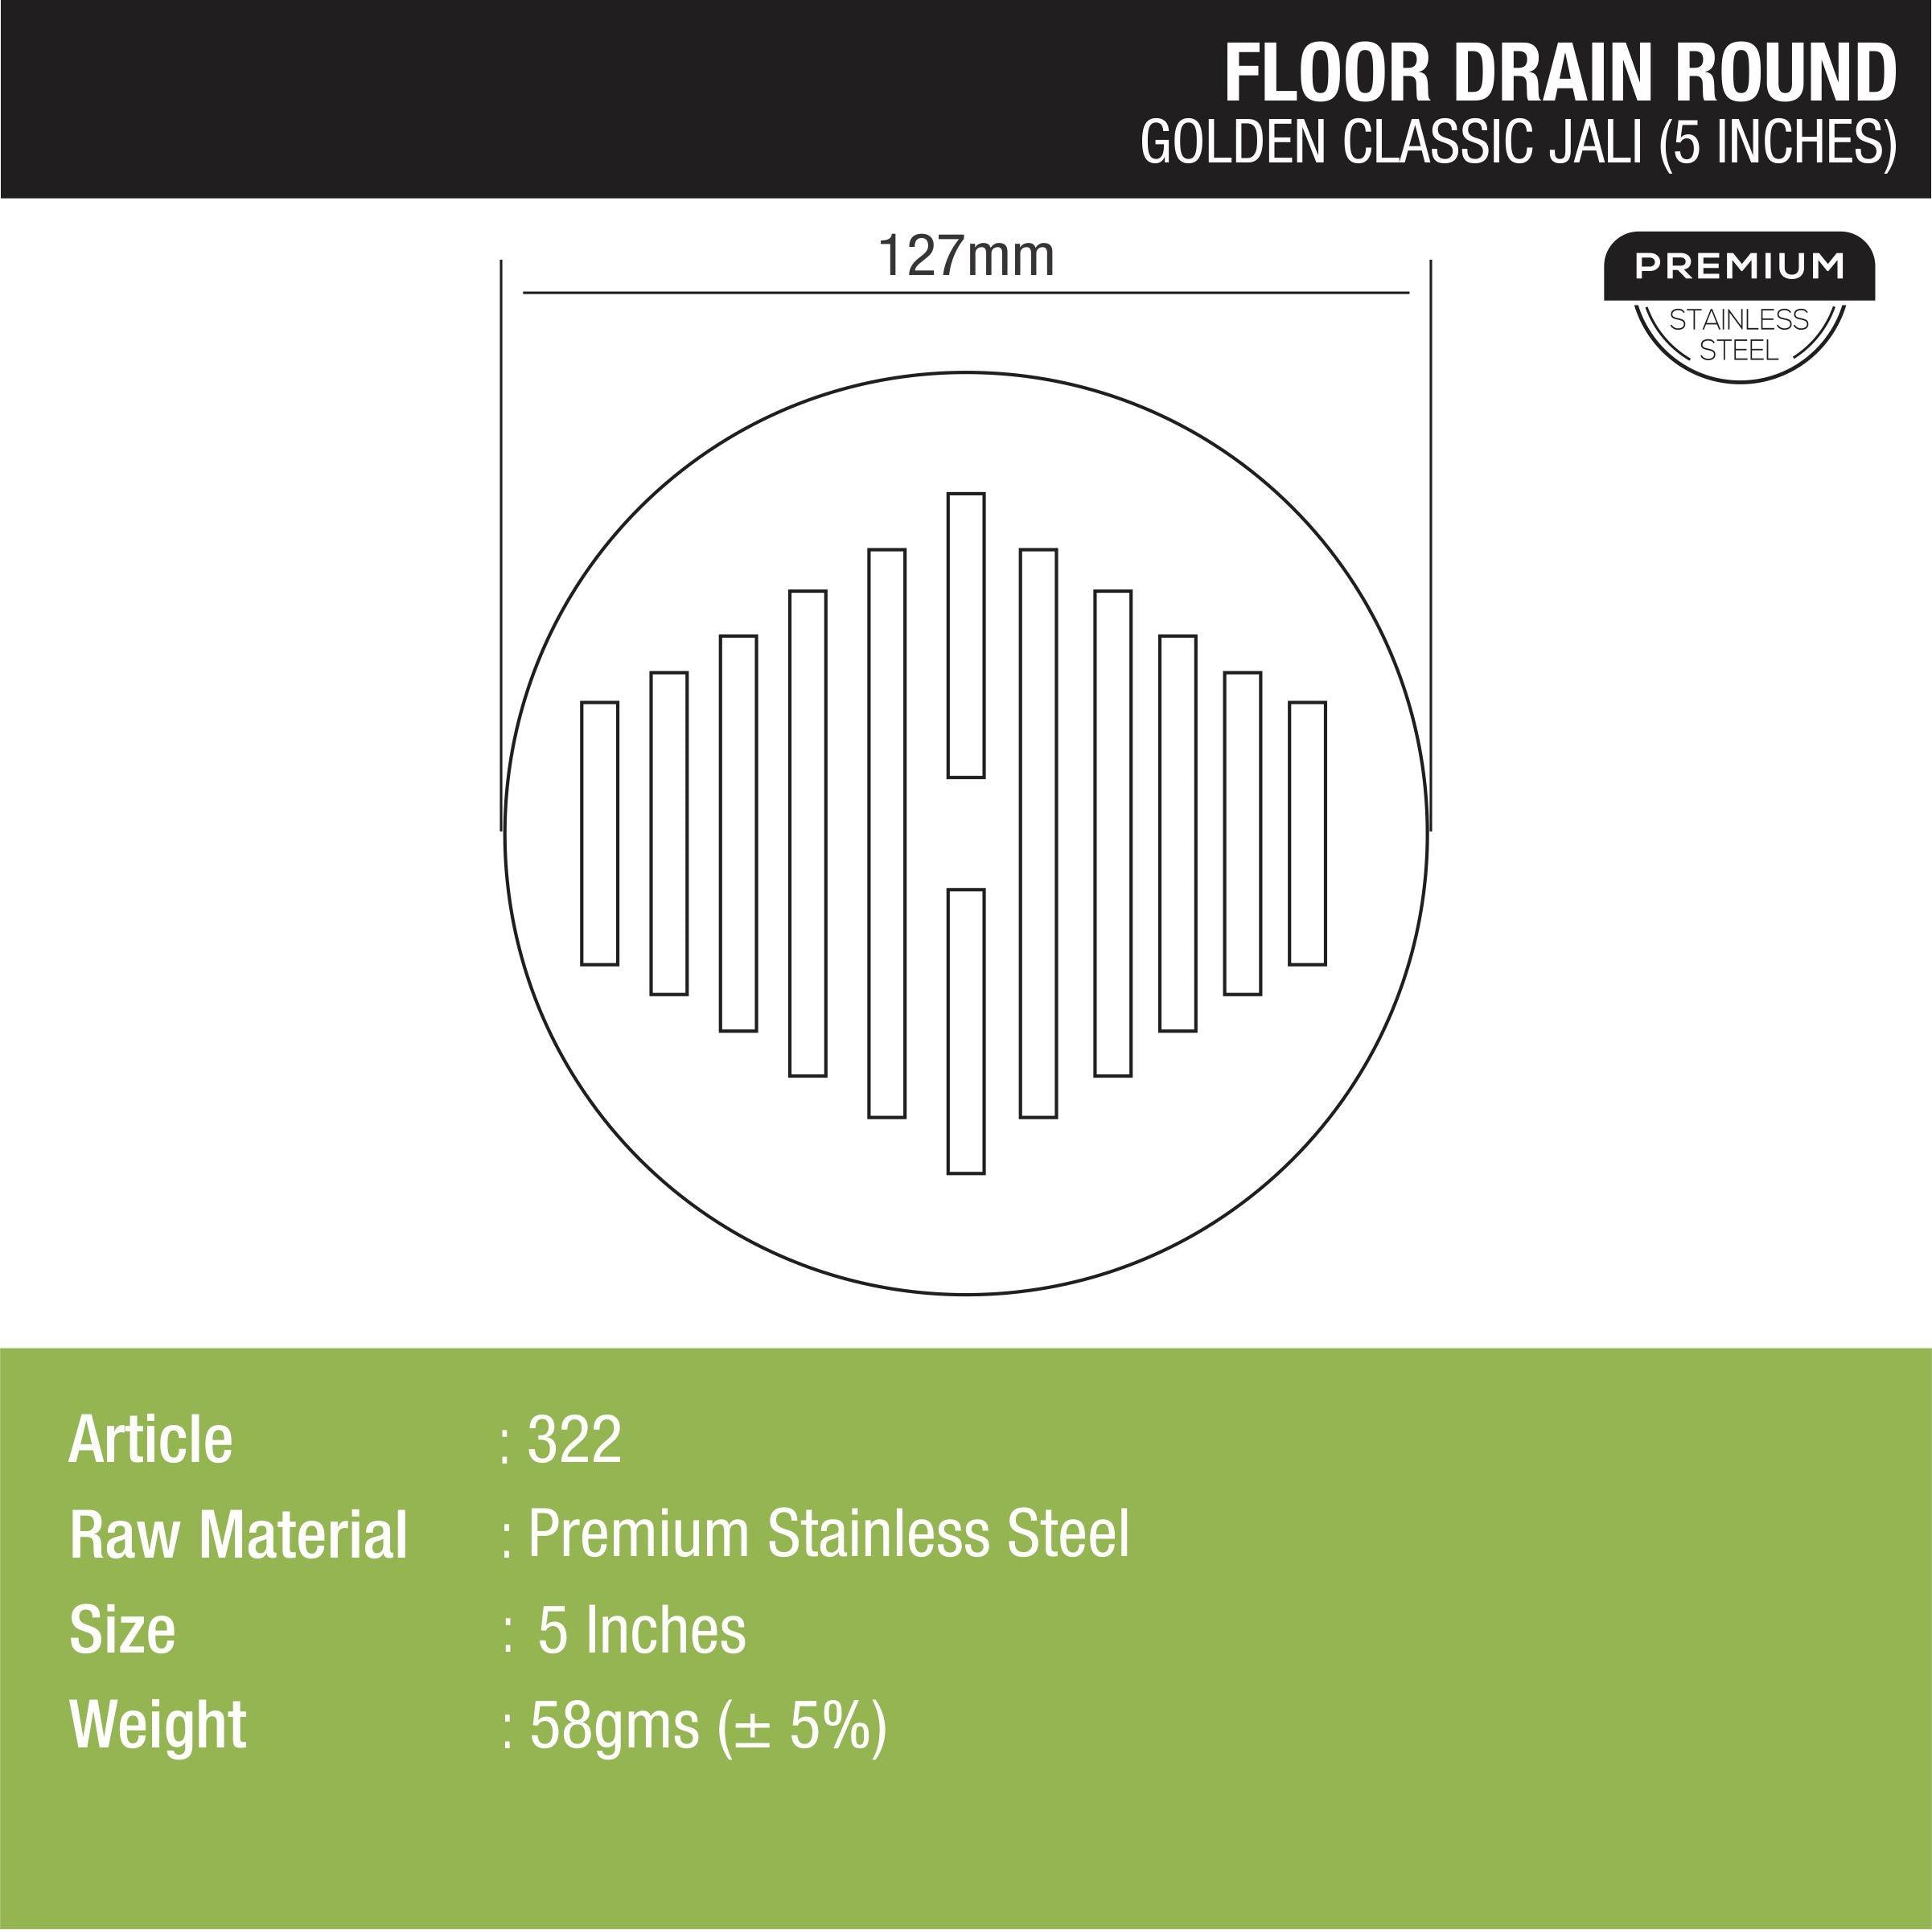 Golden Classic Jali Round Floor Drain (5 inches) dimensions and sizes